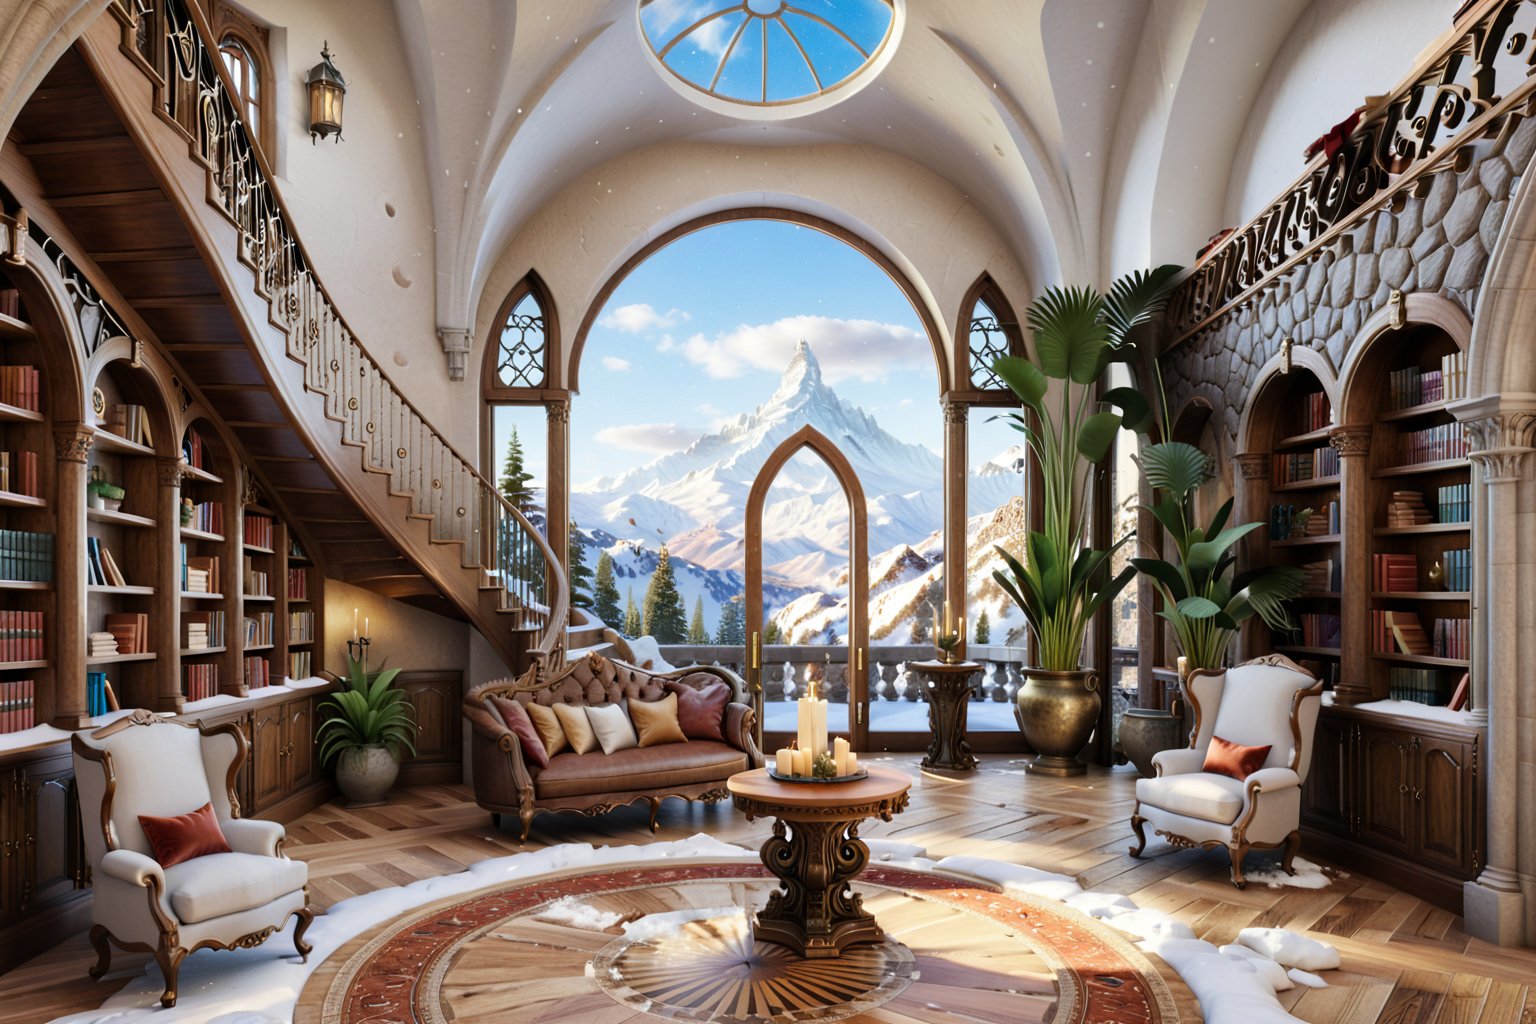 8K, (raw photos:1.4), (photorealistic:1.4), photo of wizard's library in secluded high_mountain manor, magical candelabra, expansive bookcases, comfortable luxurious classic armchairs, golden hour light, (massive window) seamlessly melds into a skylight, providing picturesque majestic view of snow-covered mountainrange, room is high-ceilinged, spanning two stories, winding ornate staircase. ((entire interior is covered beautifully by (exotic plants:2), symbiosis between natural fantastical exoticness and classically elegant wooden style, (lawn_floor:3)). important element: (human-sized portal_to_another_world on the wall showing desert on the other side), massive fireplace. photo r3al,Architectural100, fantasy atmosphere, Masterpiece, Best quality,8K, Ultra-high resolution